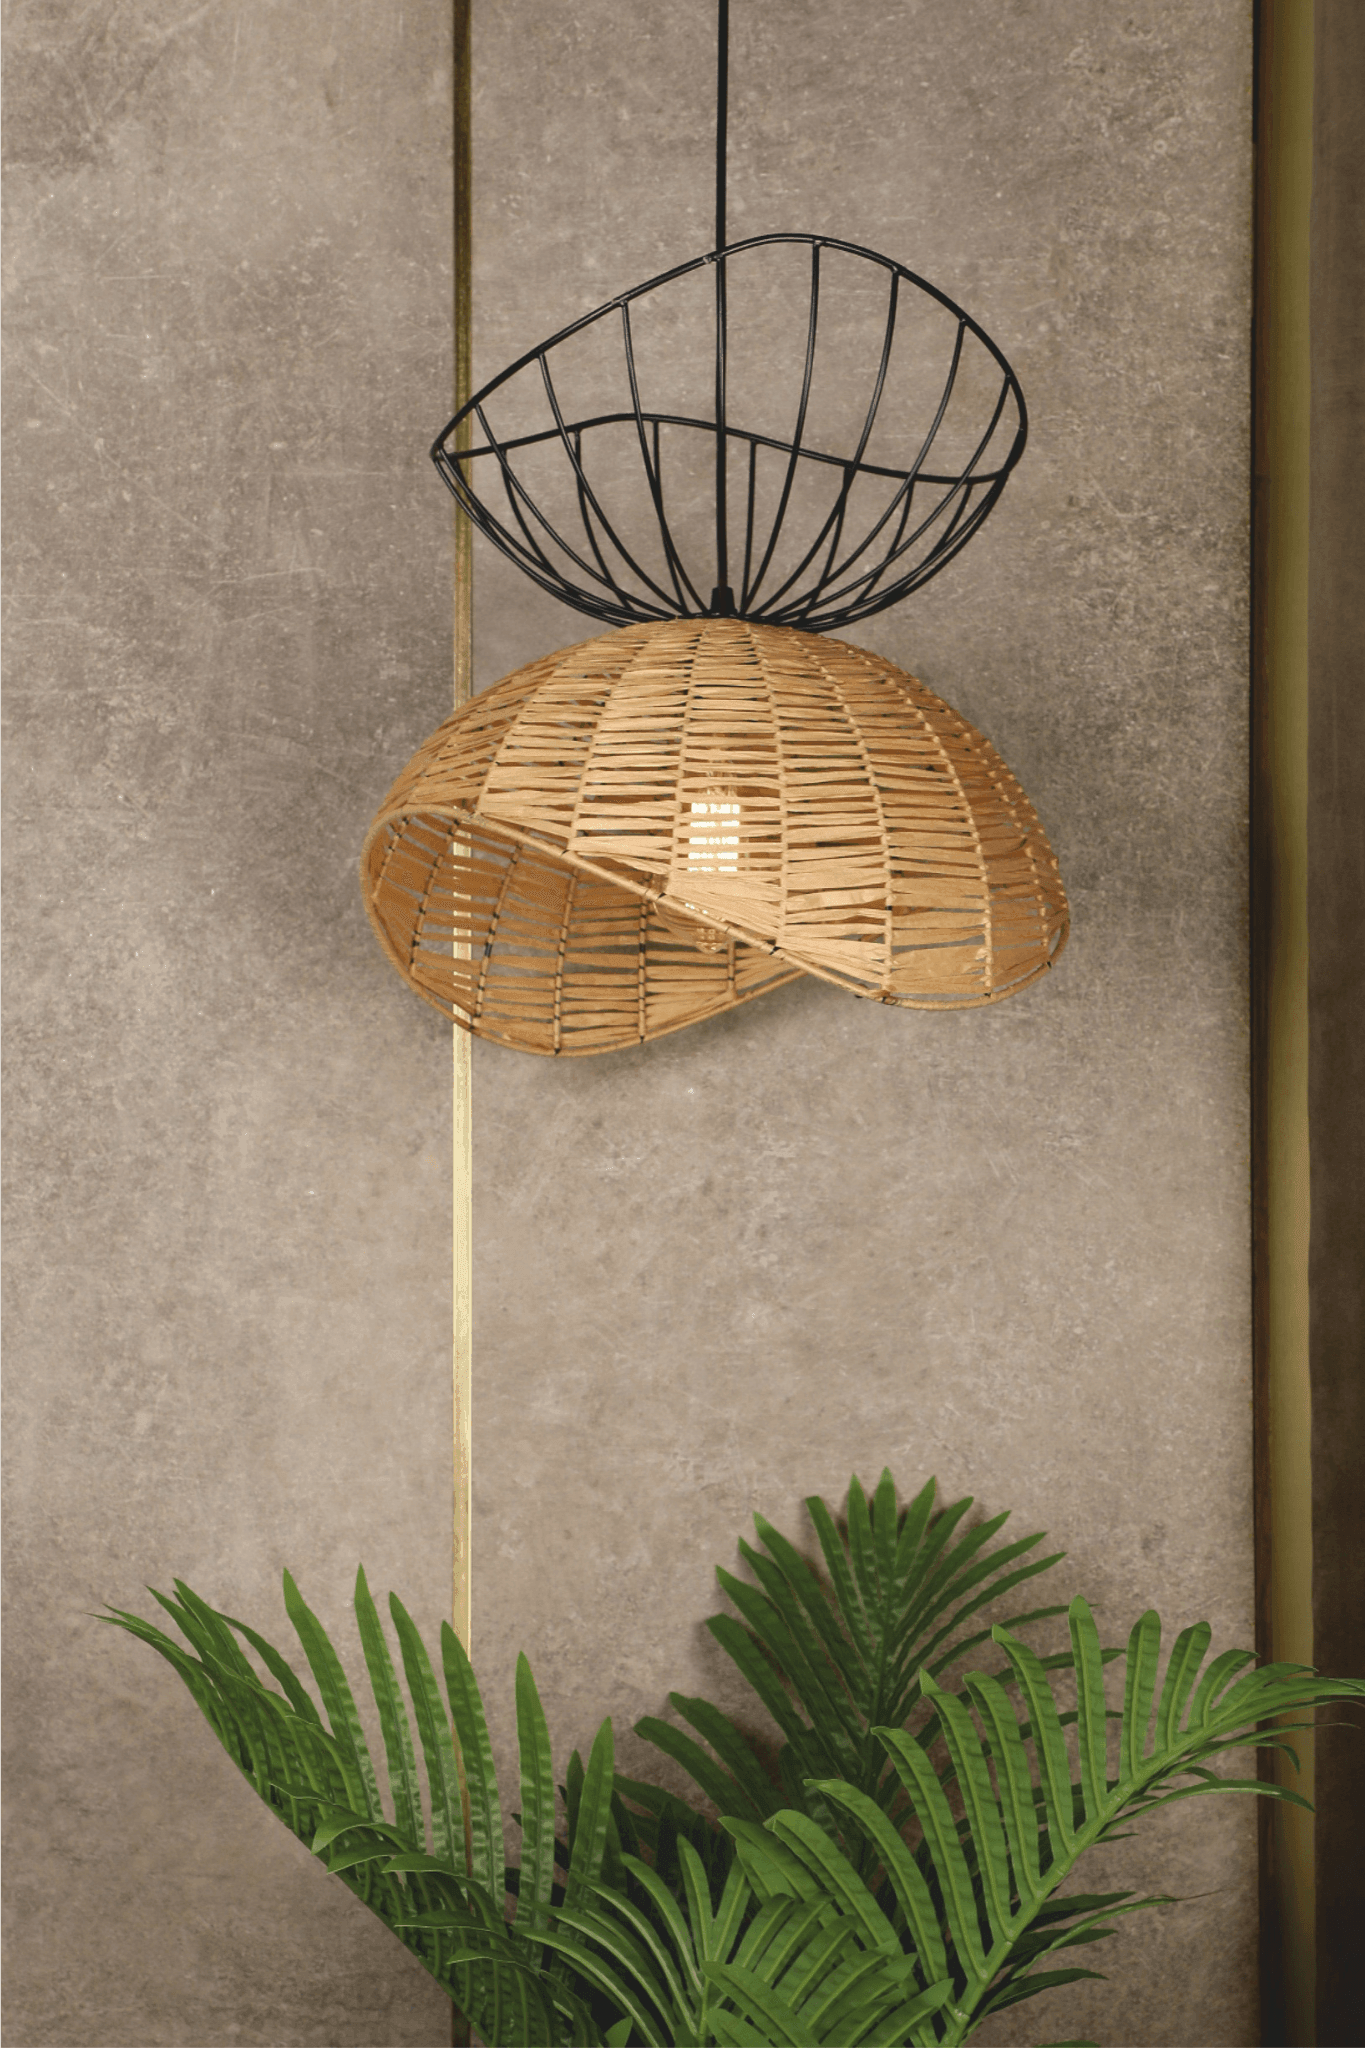 Eleganza Handcrafted Pendant Light by The Light Library